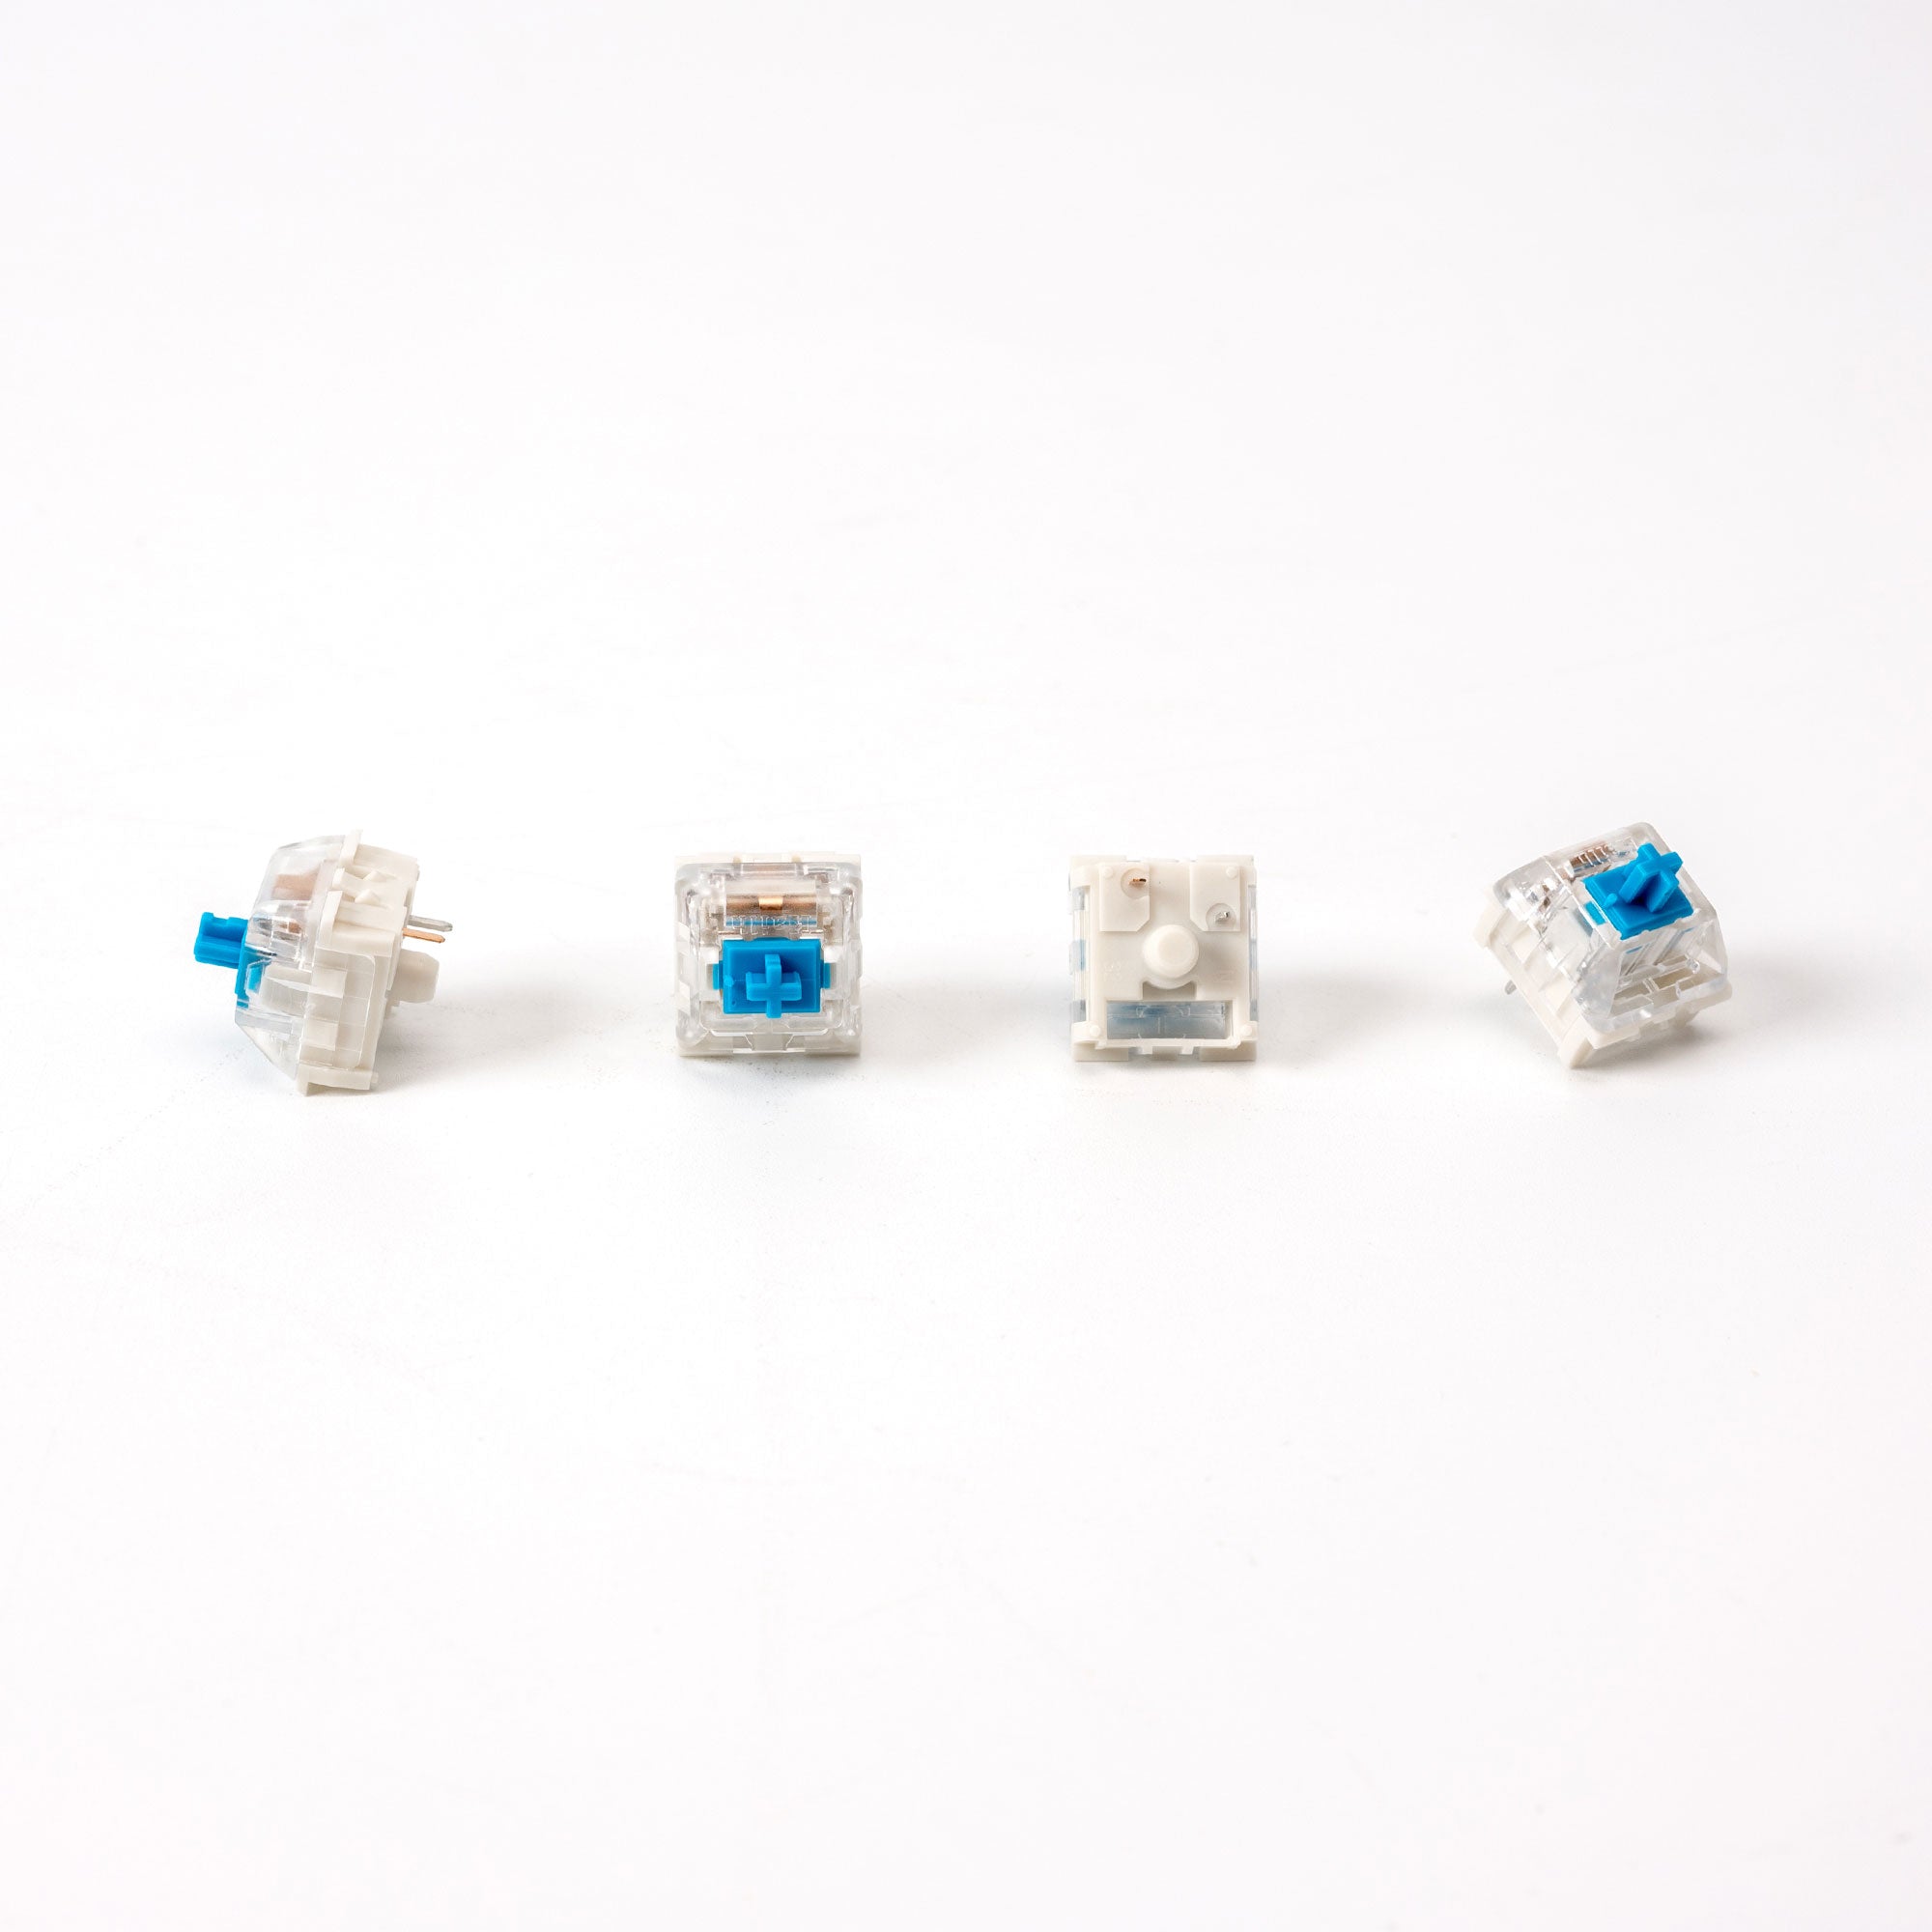 Kailh Blue Switches